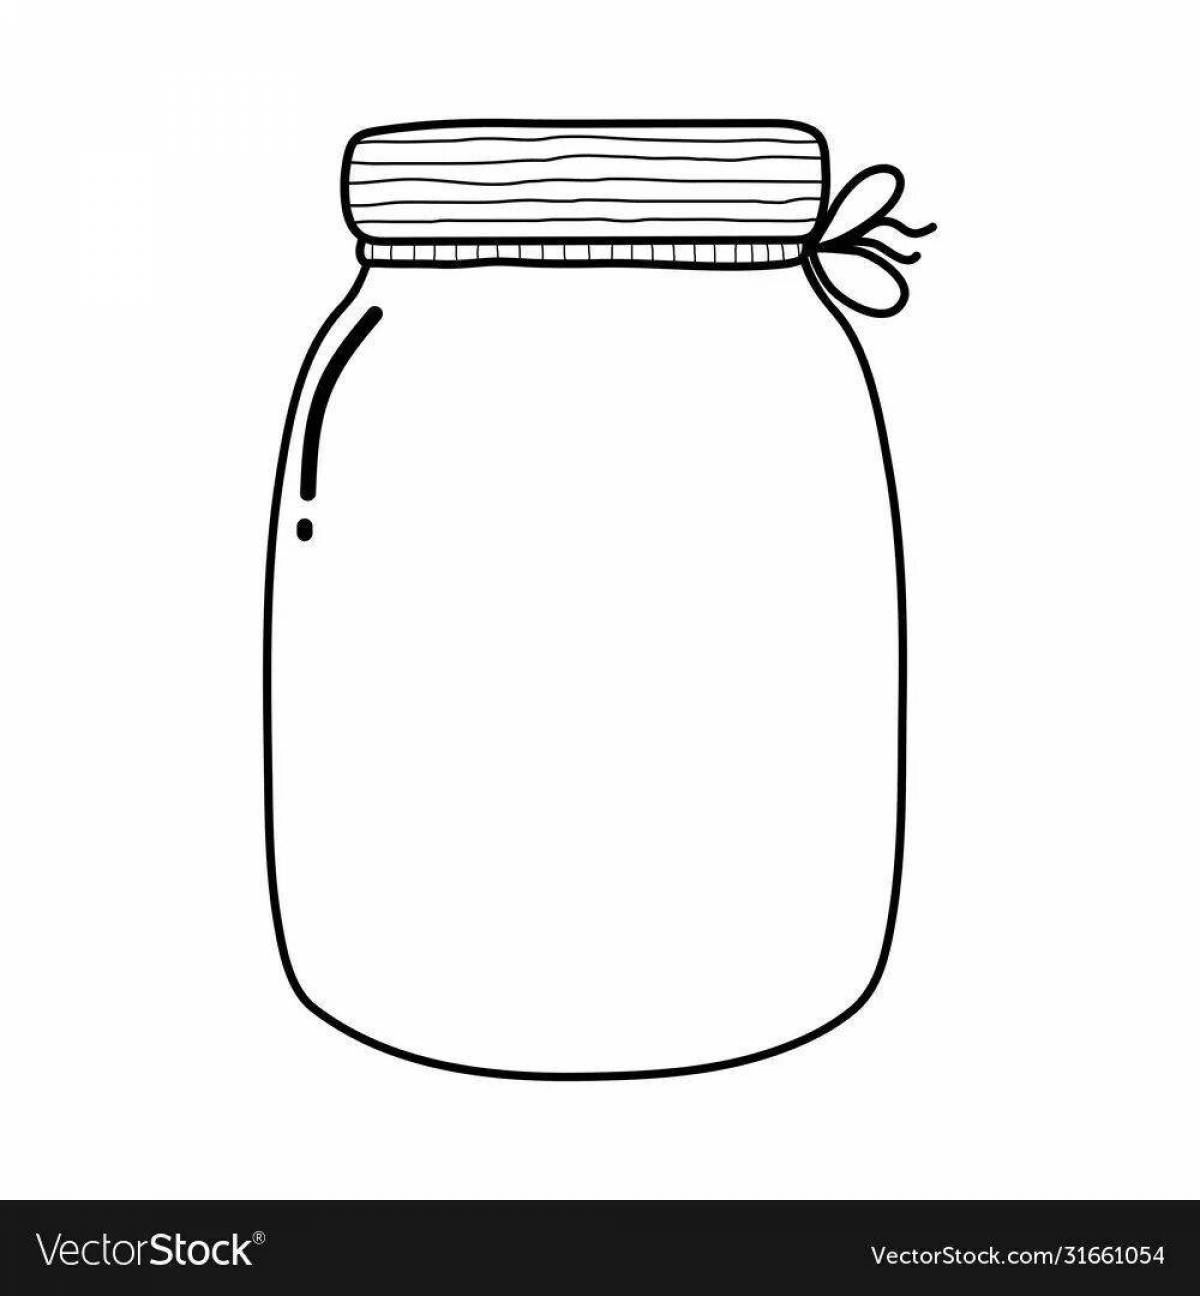 Colorful and empty jar design